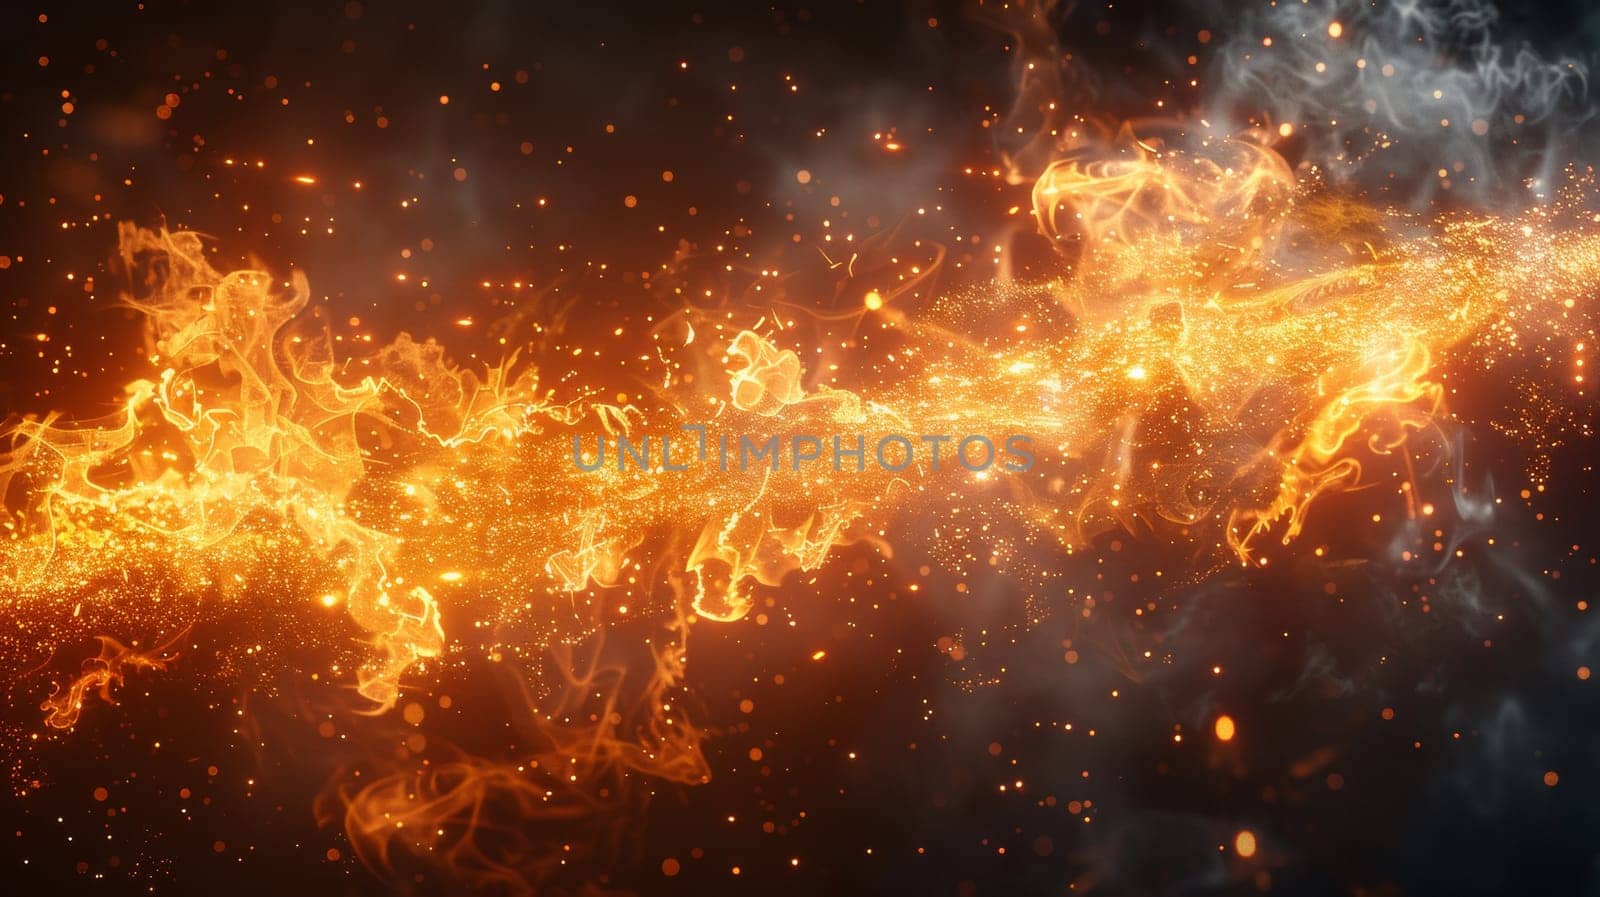 A close up of a fire explosion with sparks flying out